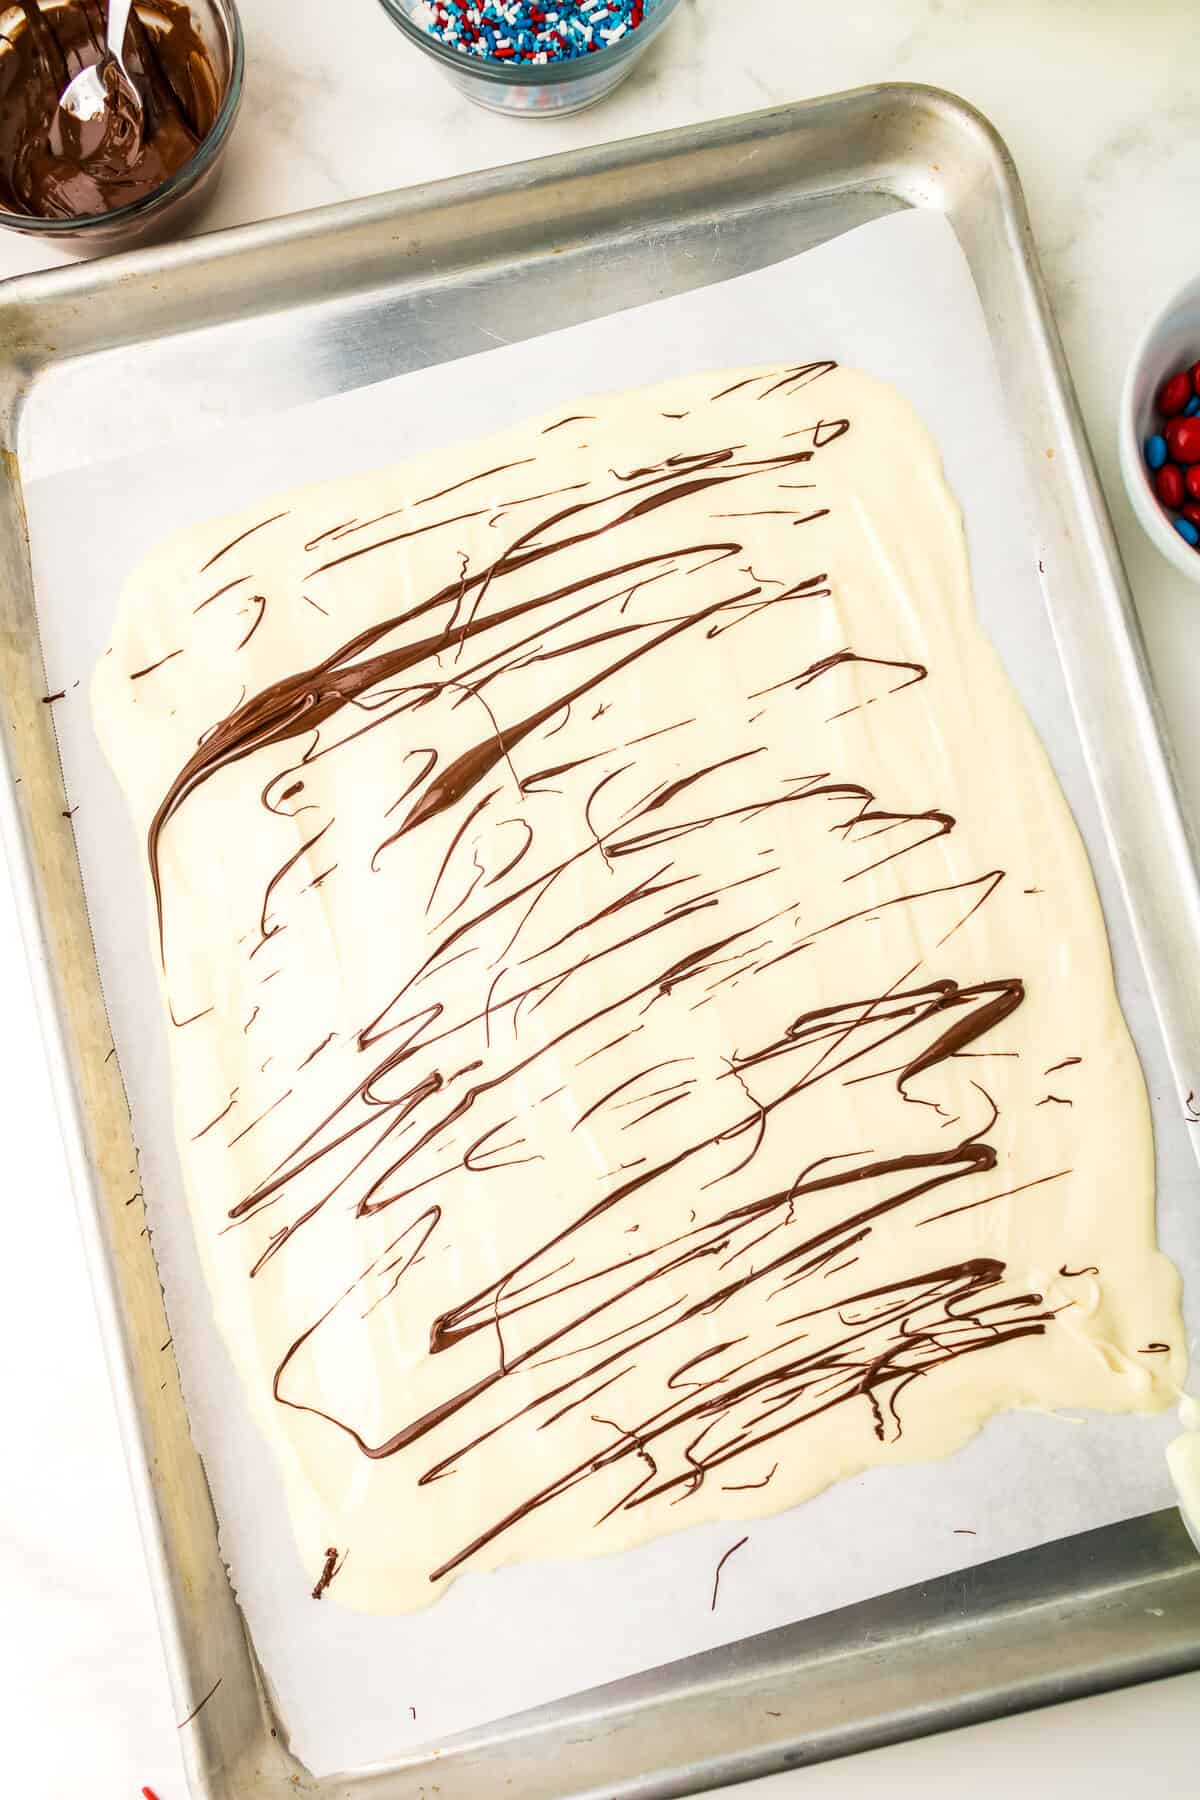 Melt Chocolate Chips and drizzle over the white chocolate.